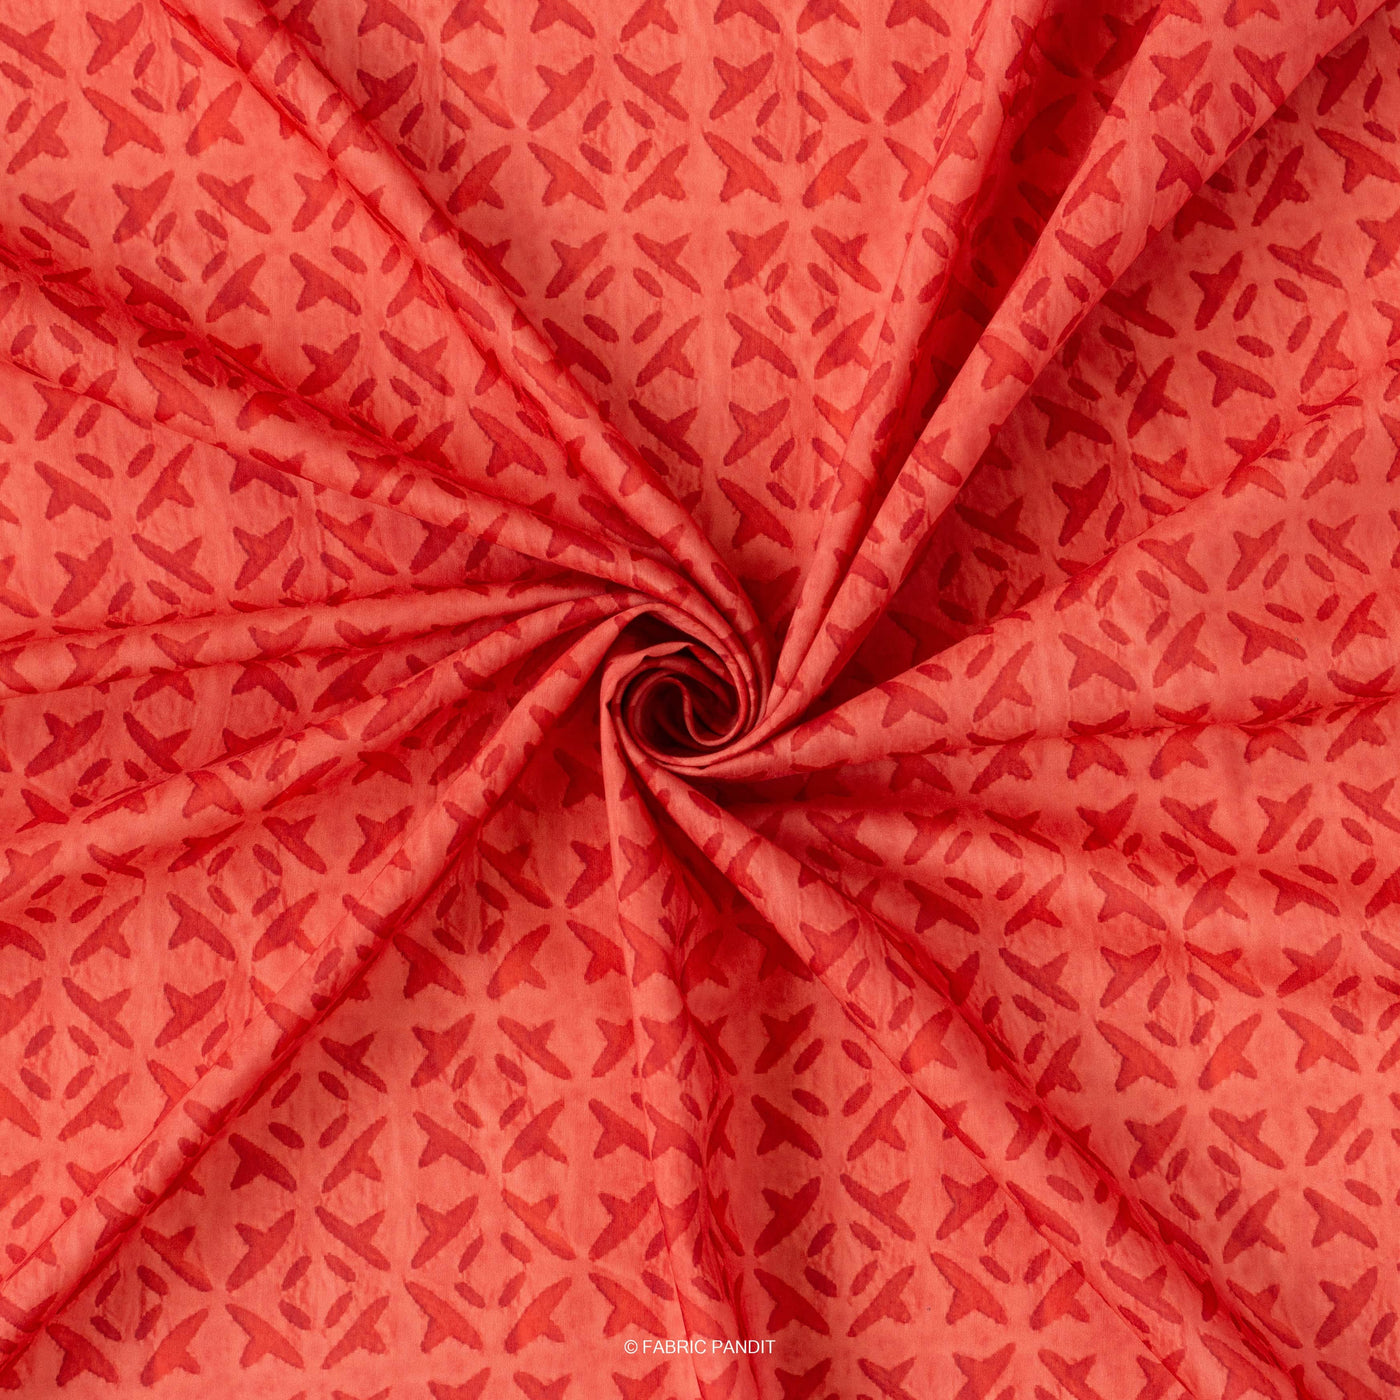 Fabric Pandit Fabric Salmon Red Criss-Cross Applique Pattern Digital Printed Poly Blend Muslin Fabric (Width 44 Inches)